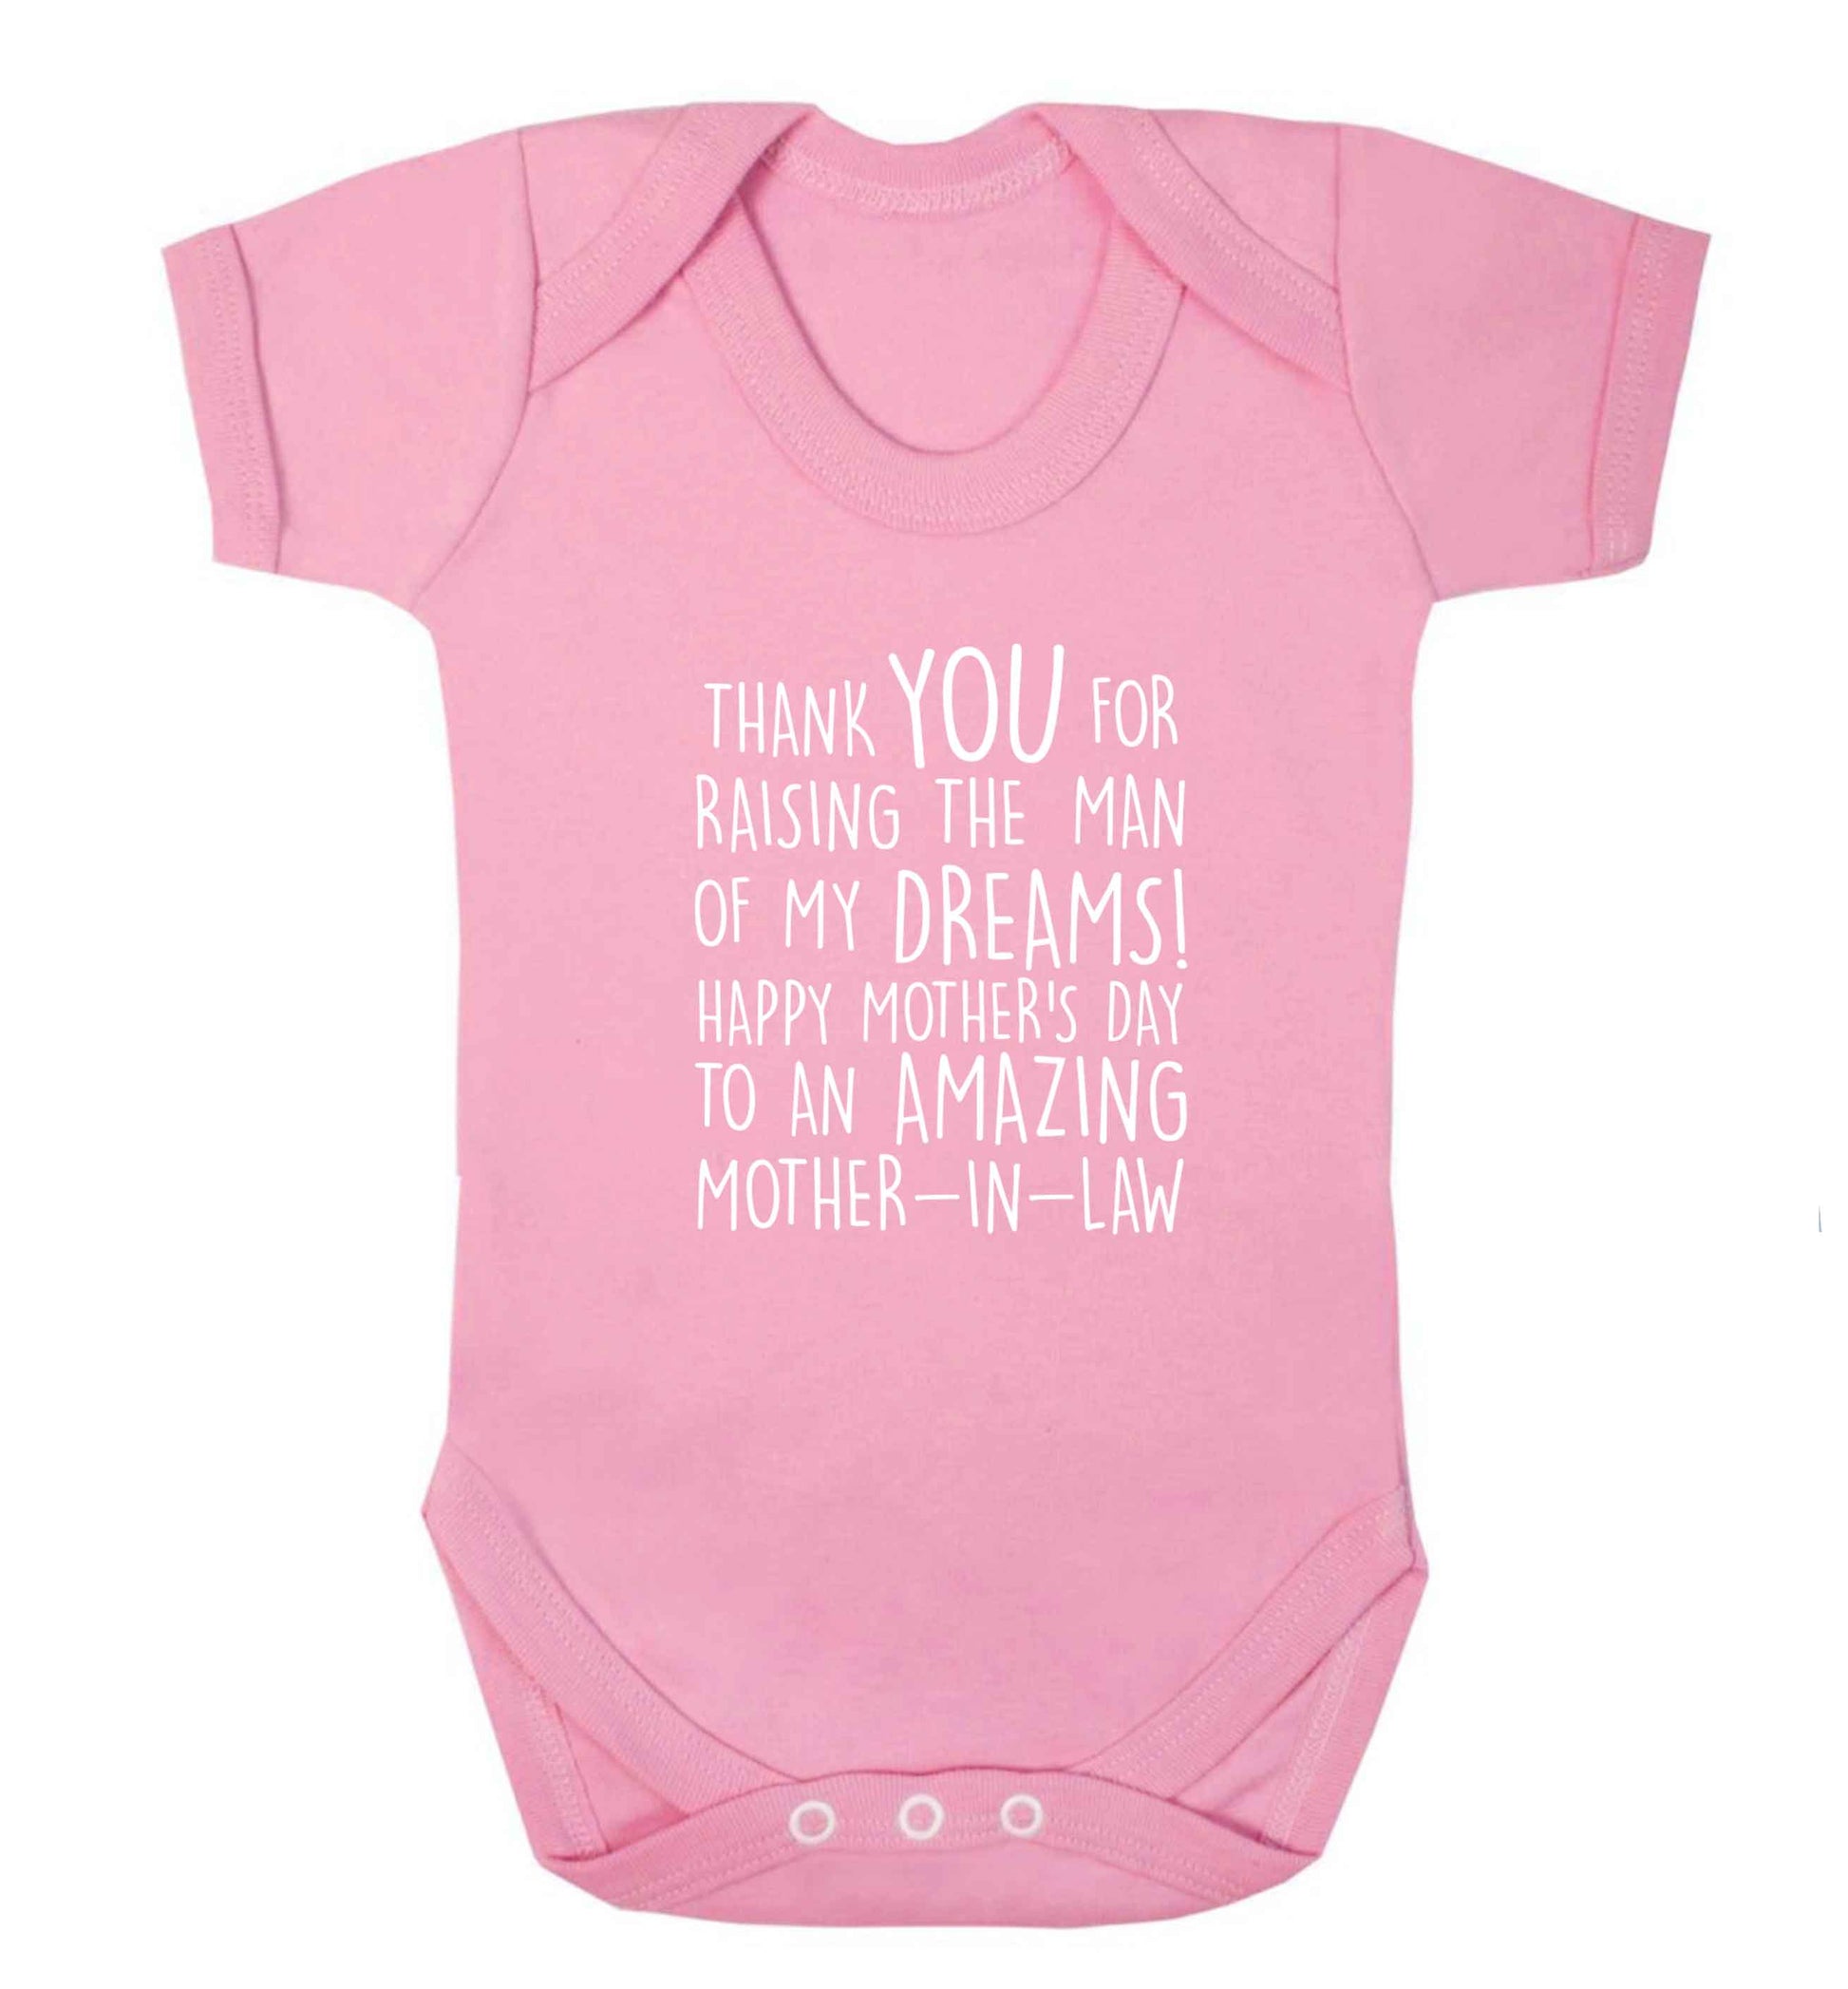 Raising the man of my dreams mother's day mother-in-law baby vest pale pink 18-24 months